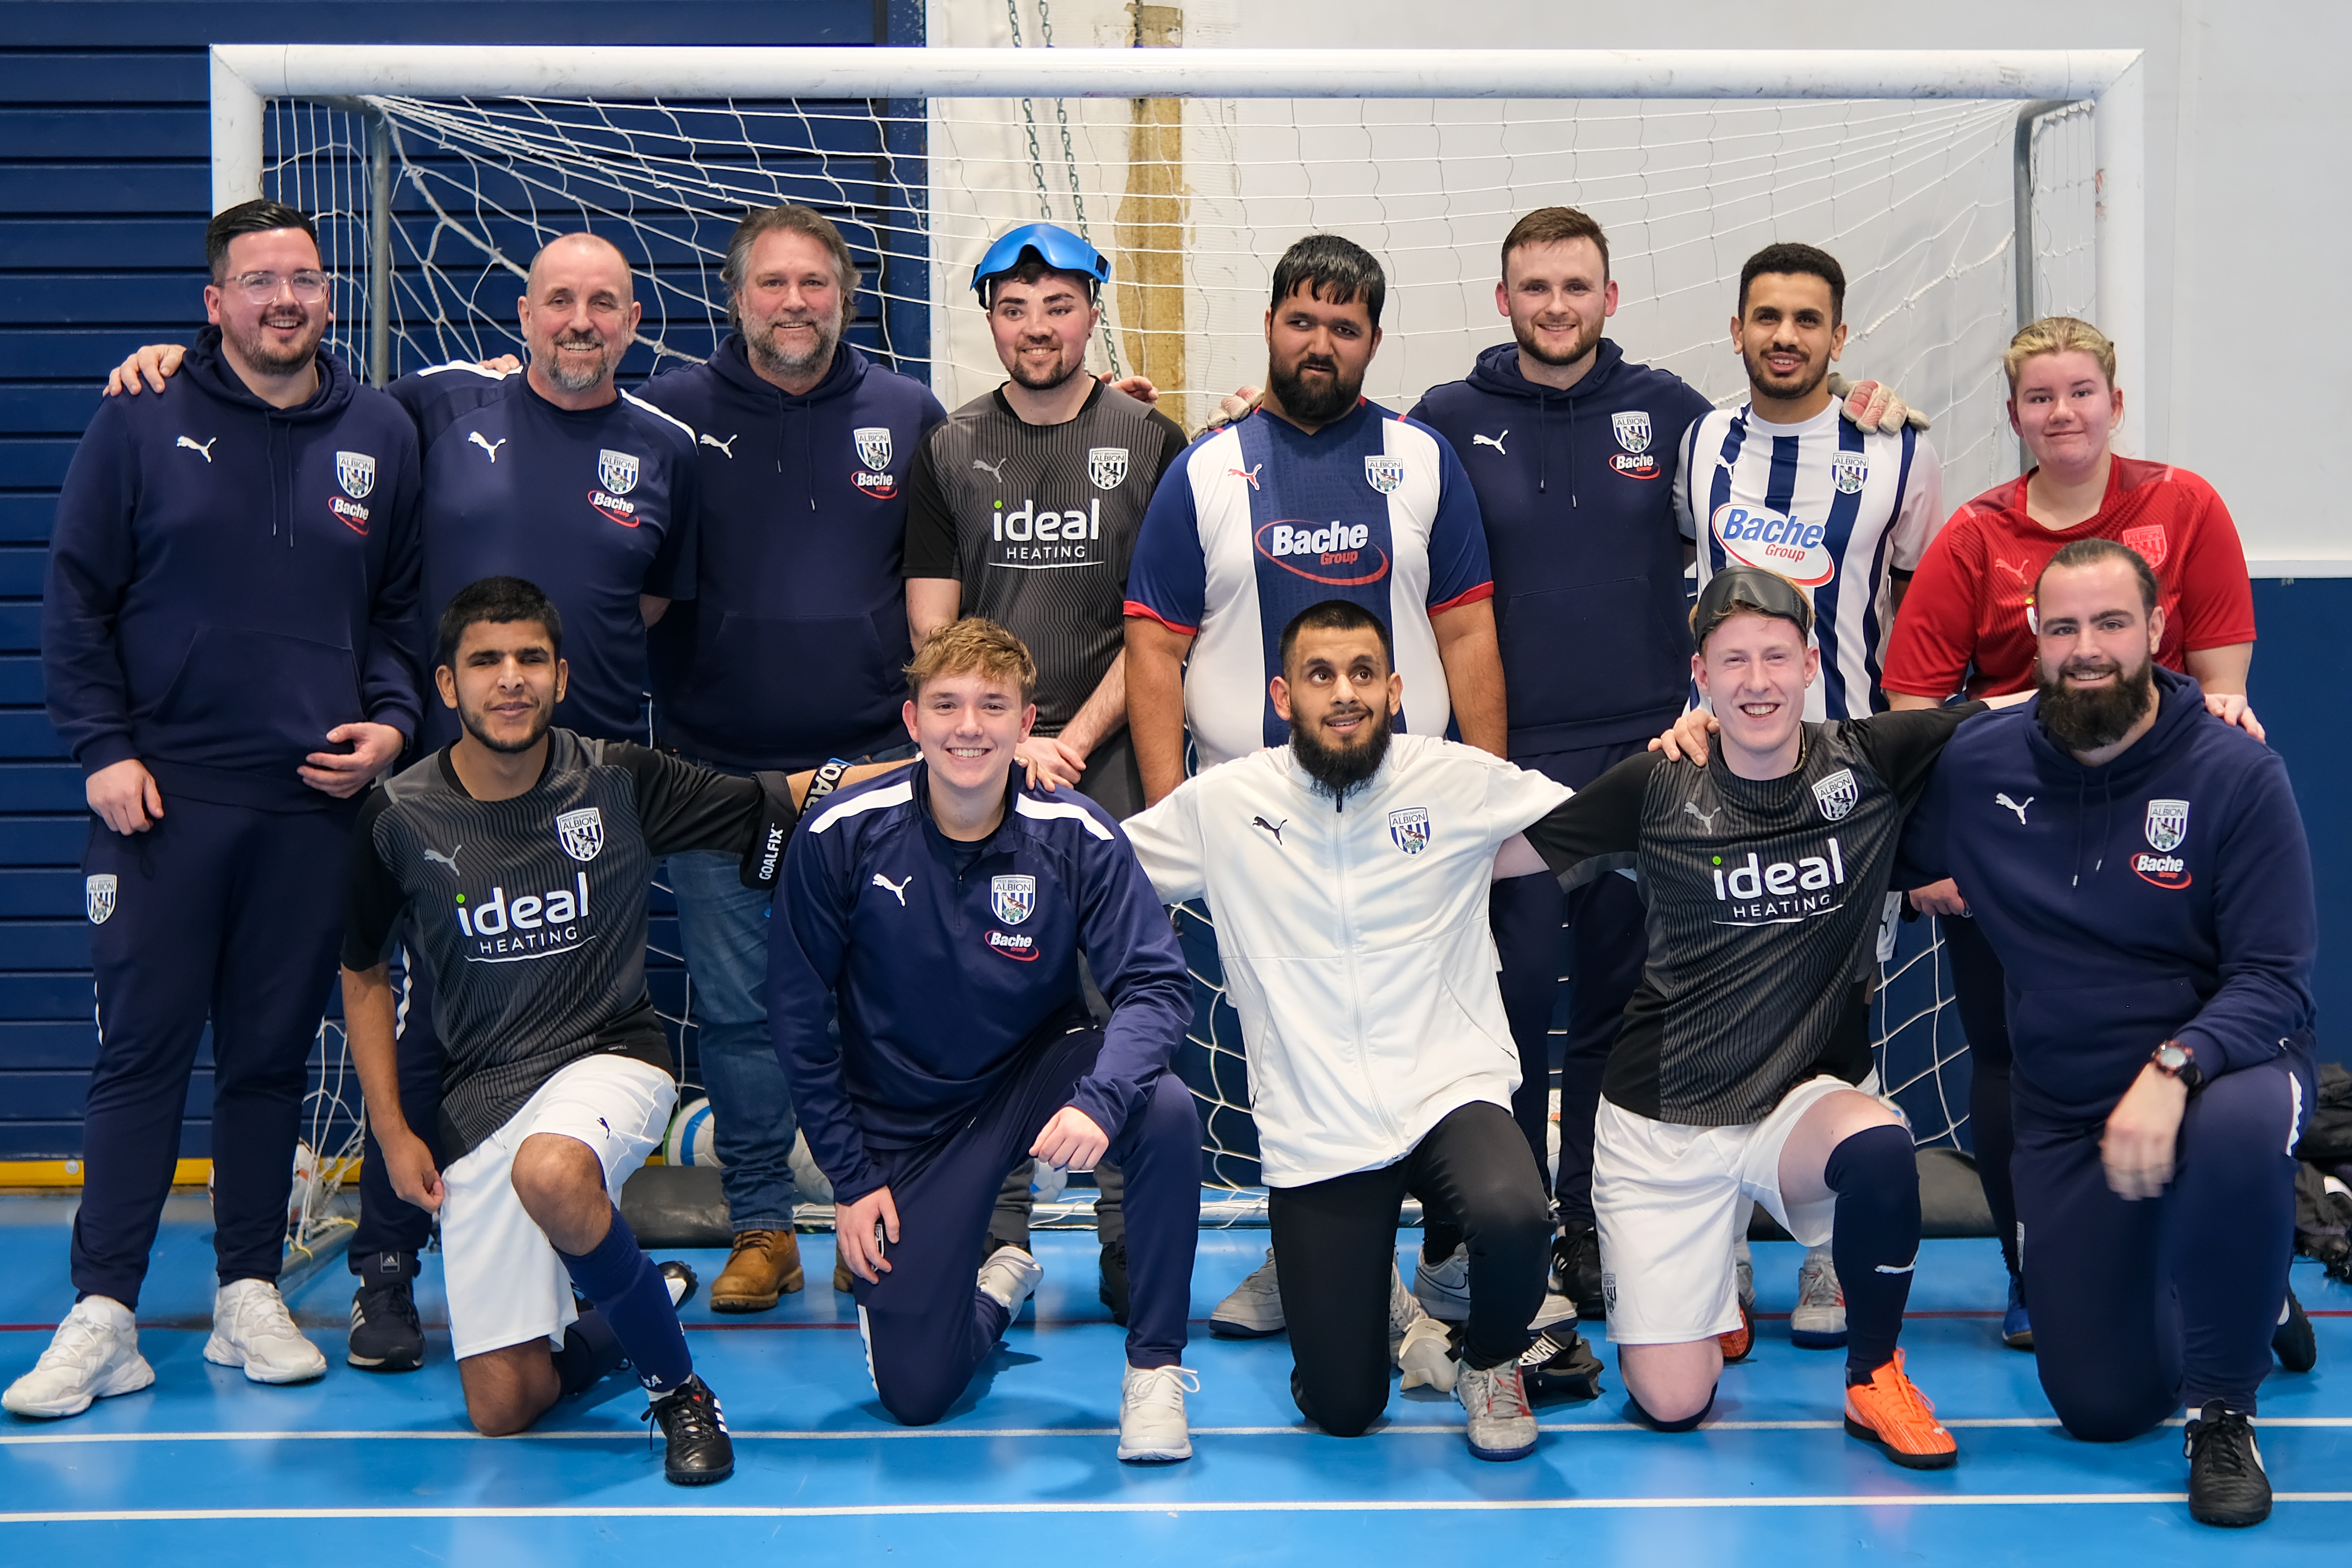 Andy Johnson with WBA Blind team